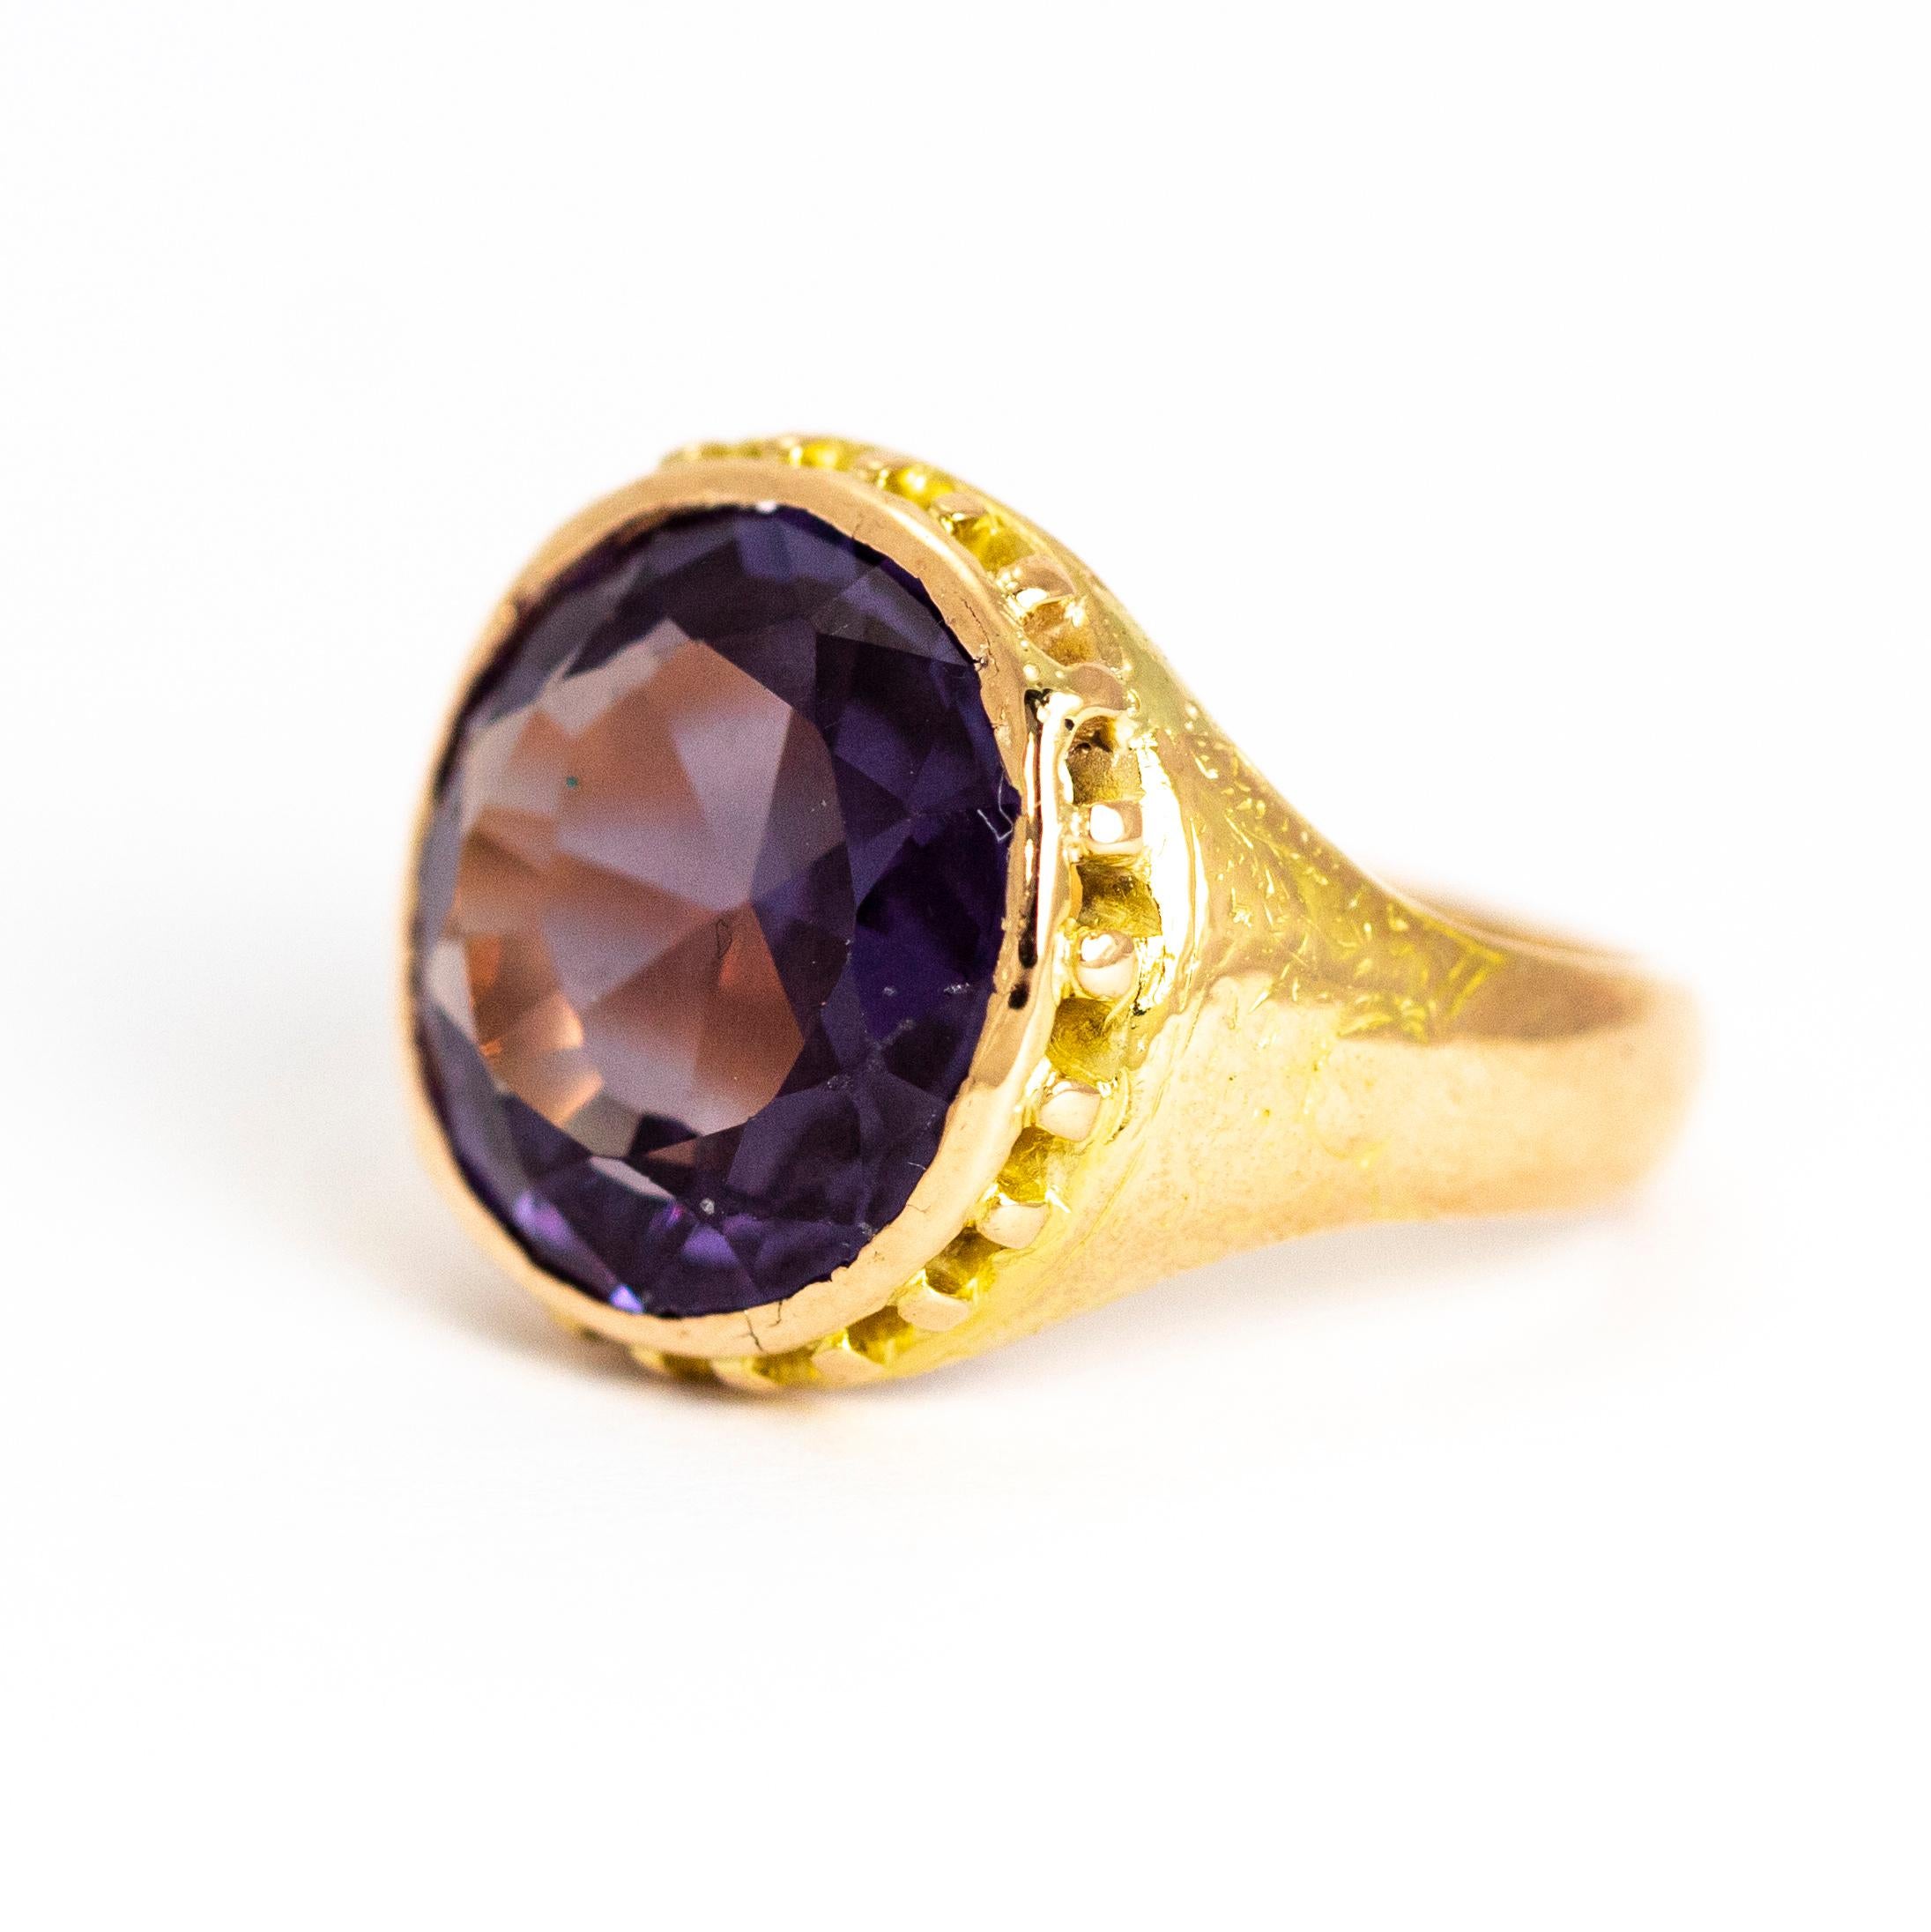 The Amethyst set in this ring has a wonderful sparkle to it and in the light shows beautiful hues of purple. The Amethyst is round in shape and cut to really show off the colour. The chunky and ornate shank is modelled in 15 carat gold.

Ring Size: